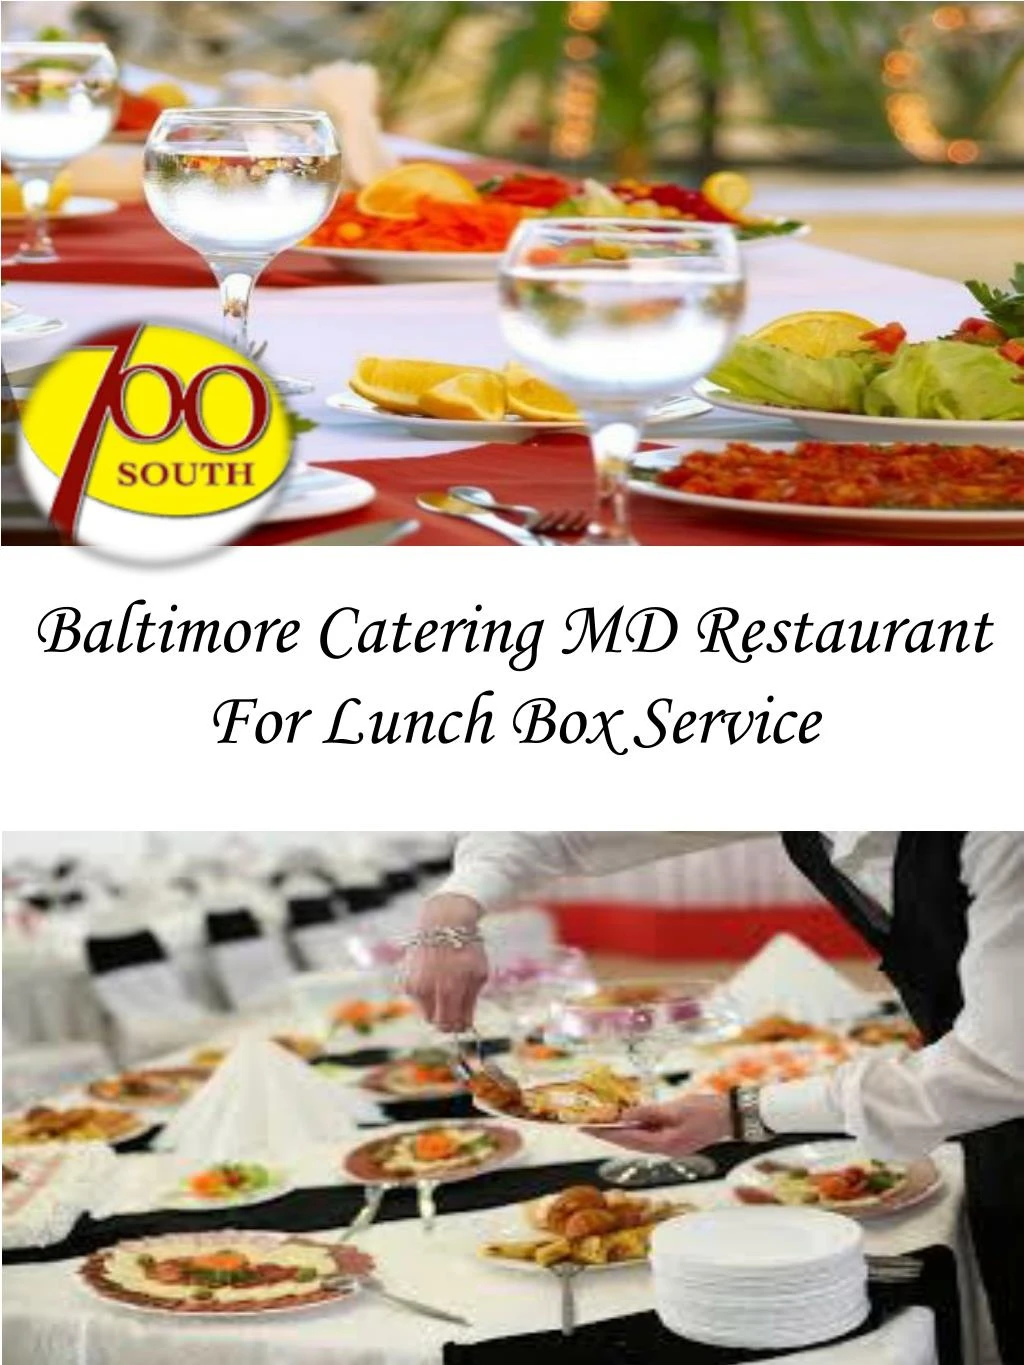 baltimore catering md restaurant for lunch box service